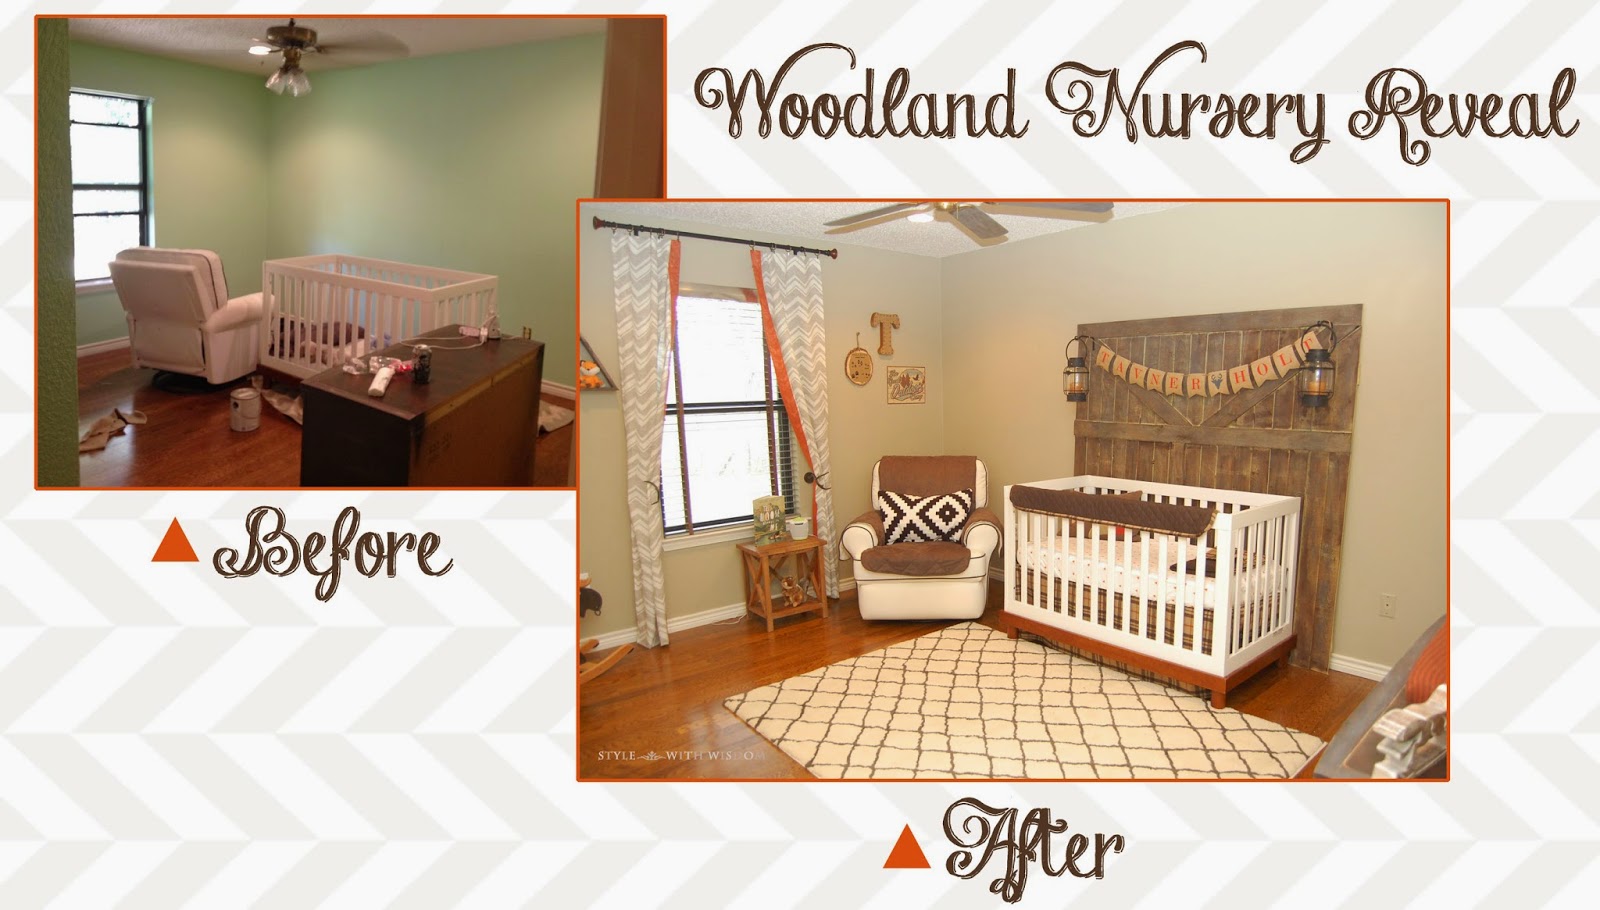 Style with Wisdom: A Woodland Nursery For Our Baby Boy!